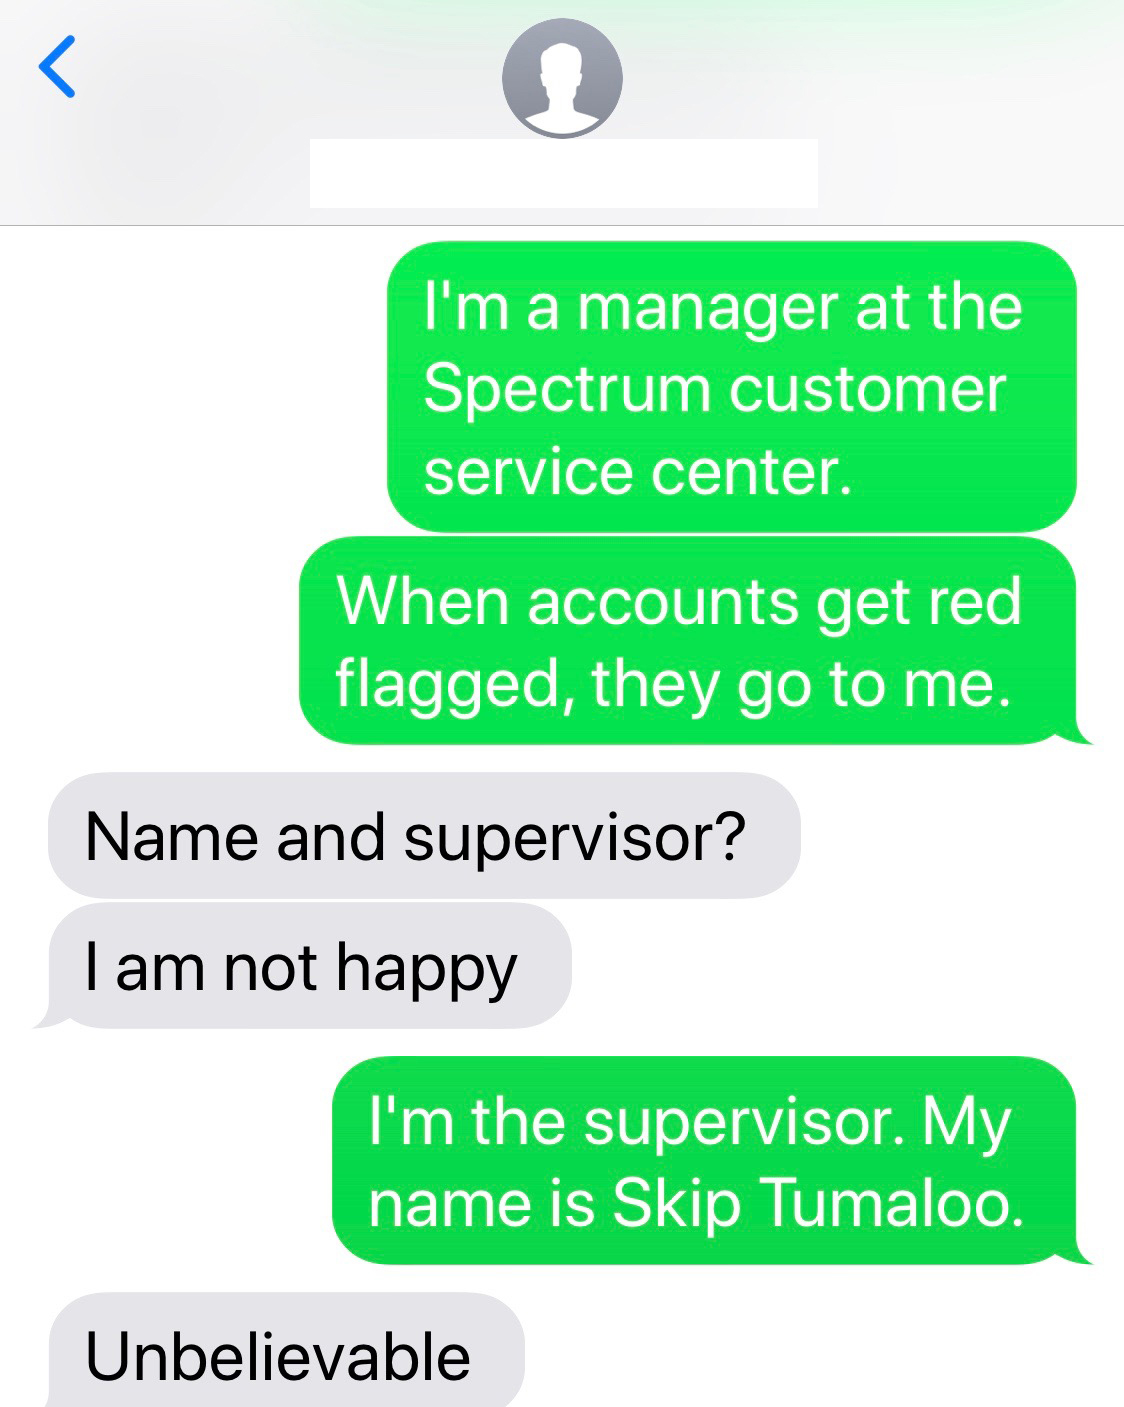 wrong number text - number - I'm a manager at the Spectrum customer service center. When accounts get red flagged, they go to me. Name and supervisor? I am not happy I'm the supervisor. My name is Skip Tumaloo. Unbelievable